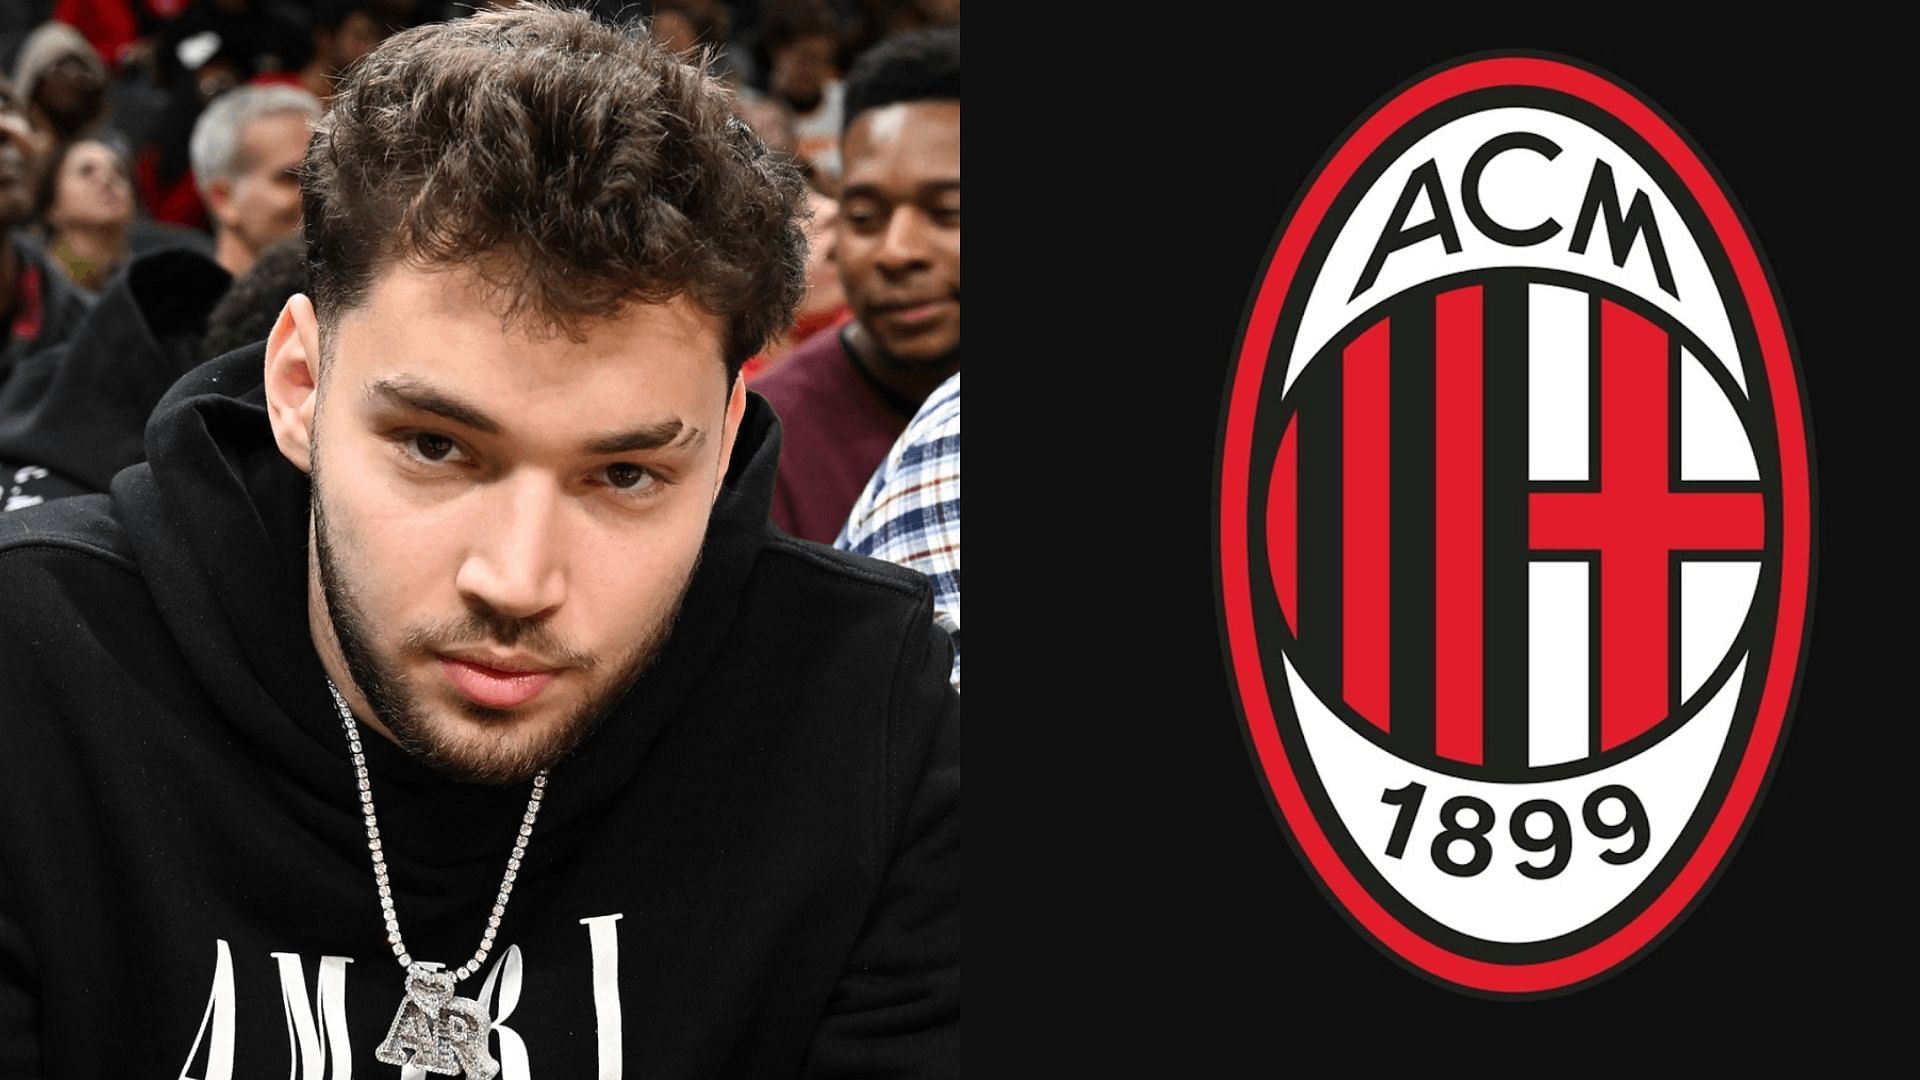 Adin Ross revealed his &quot;ownership&quot; of AC Milan (Image via AdinUpdate/X)